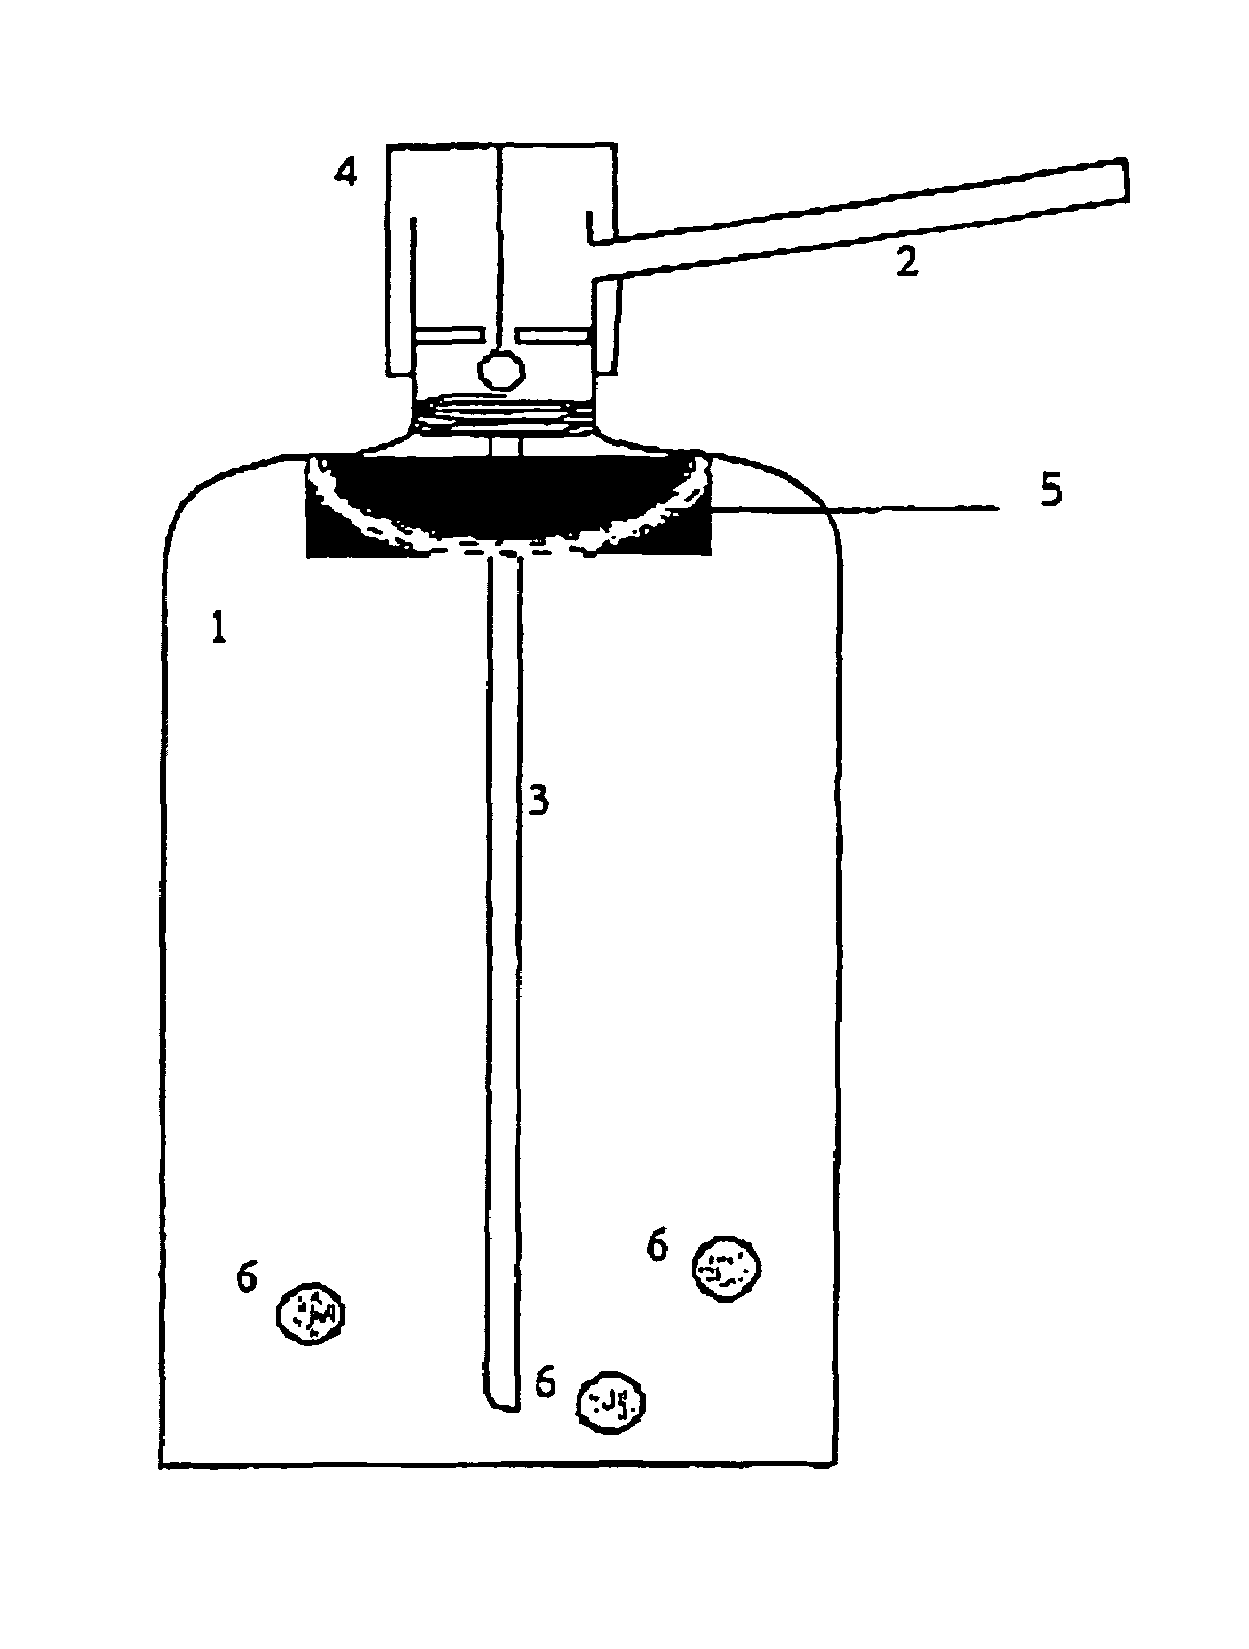 Method for preparation of biocides mixed with carbon dioxide in a pressurized container